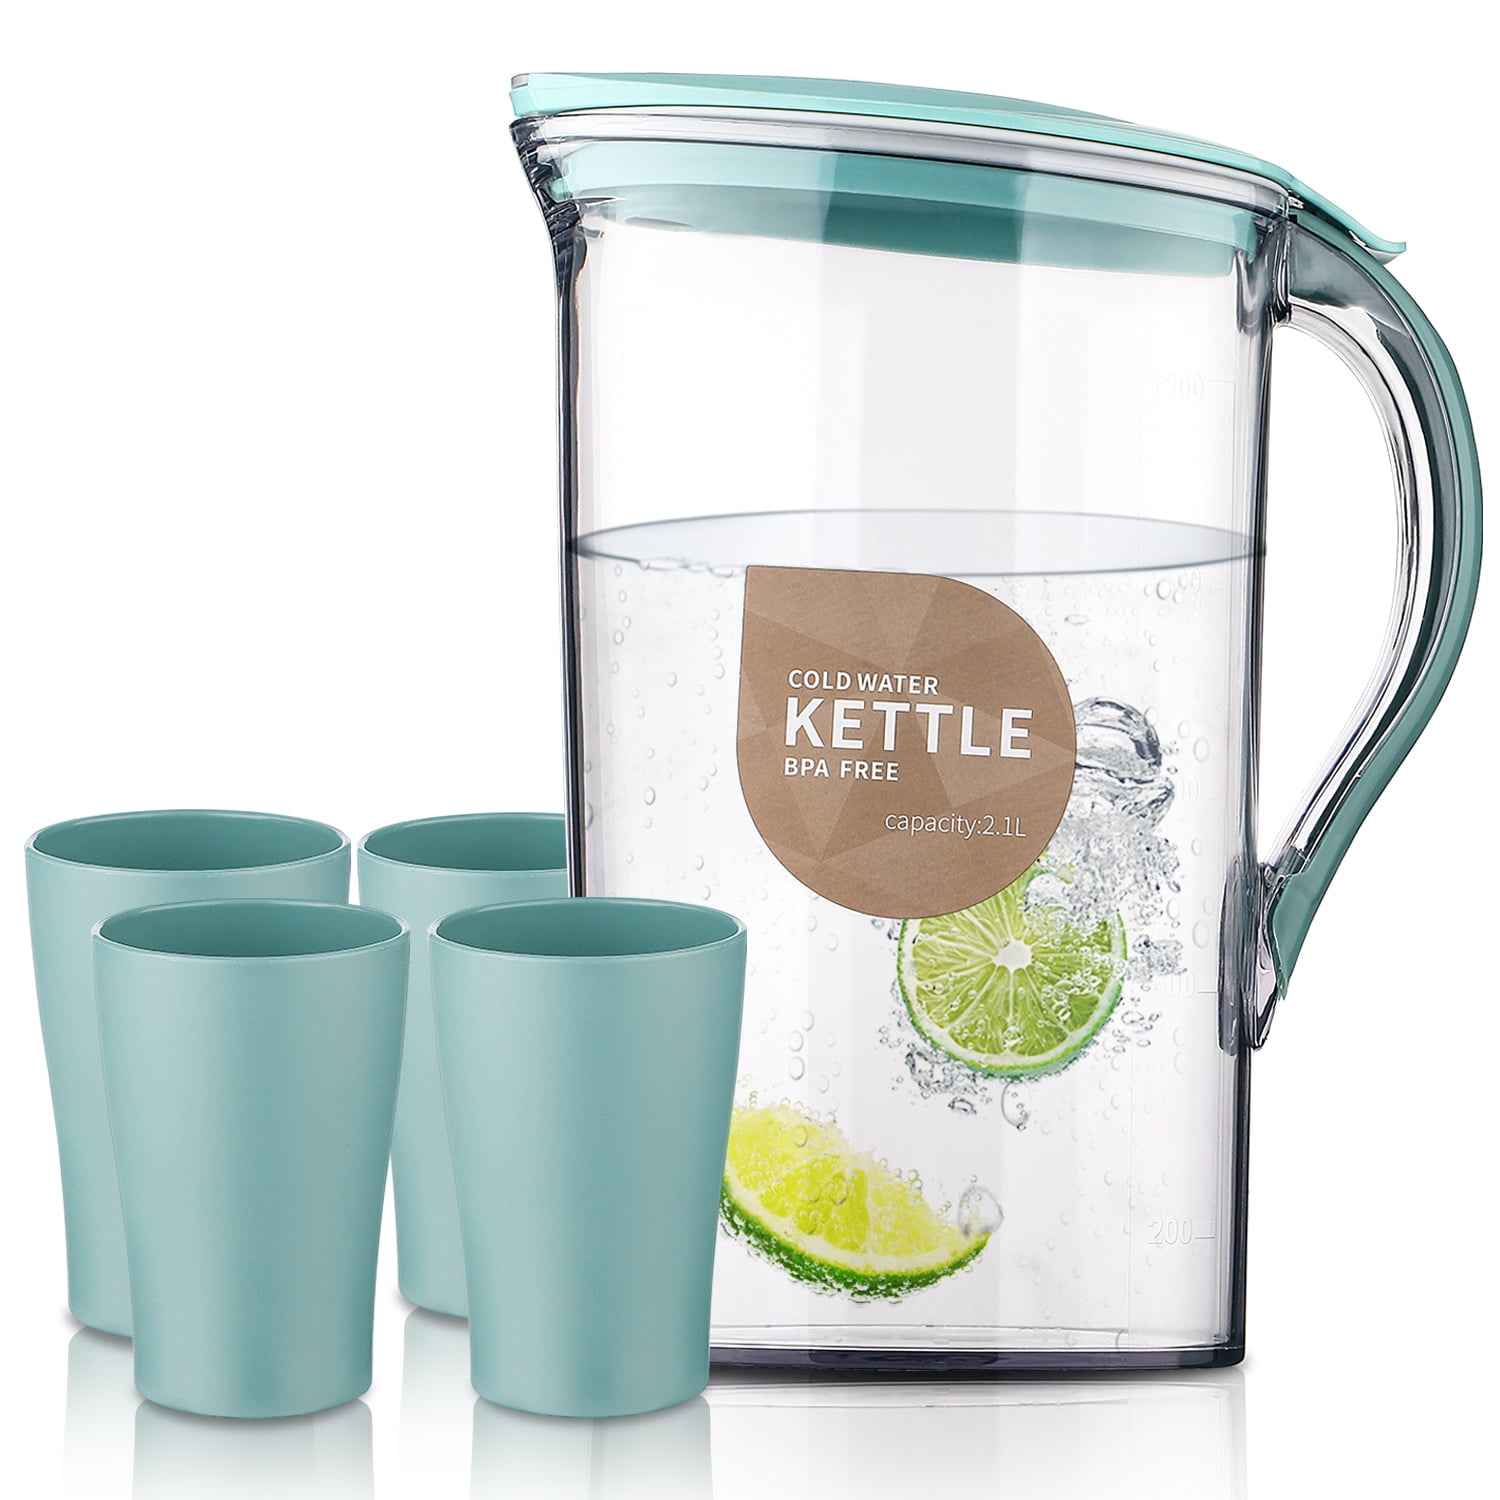 Reanea 1800ml Plastic Water Pitcher with Lid and 3 Cups (Smoke Gray)